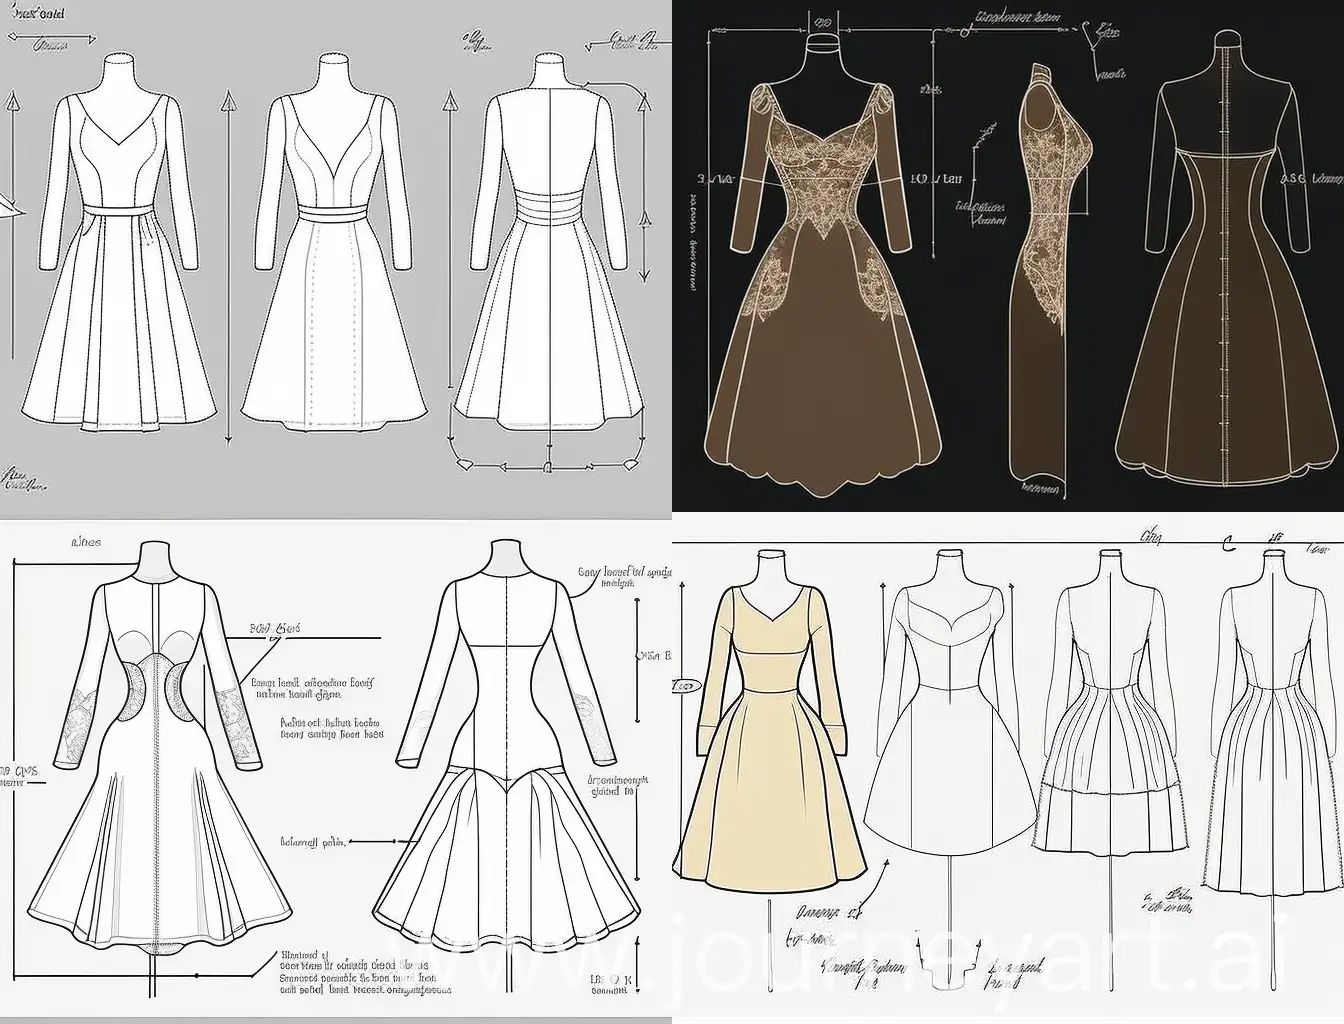 Generate 10 variations of a dress on a dress form. The dress should have a scooped neckline with lace details, long sleeves, and a natural waistline.
Here are some additional details that can be varied:

 appliqued
Sleeve style:  bishop
Skirt silhouette: A-line,